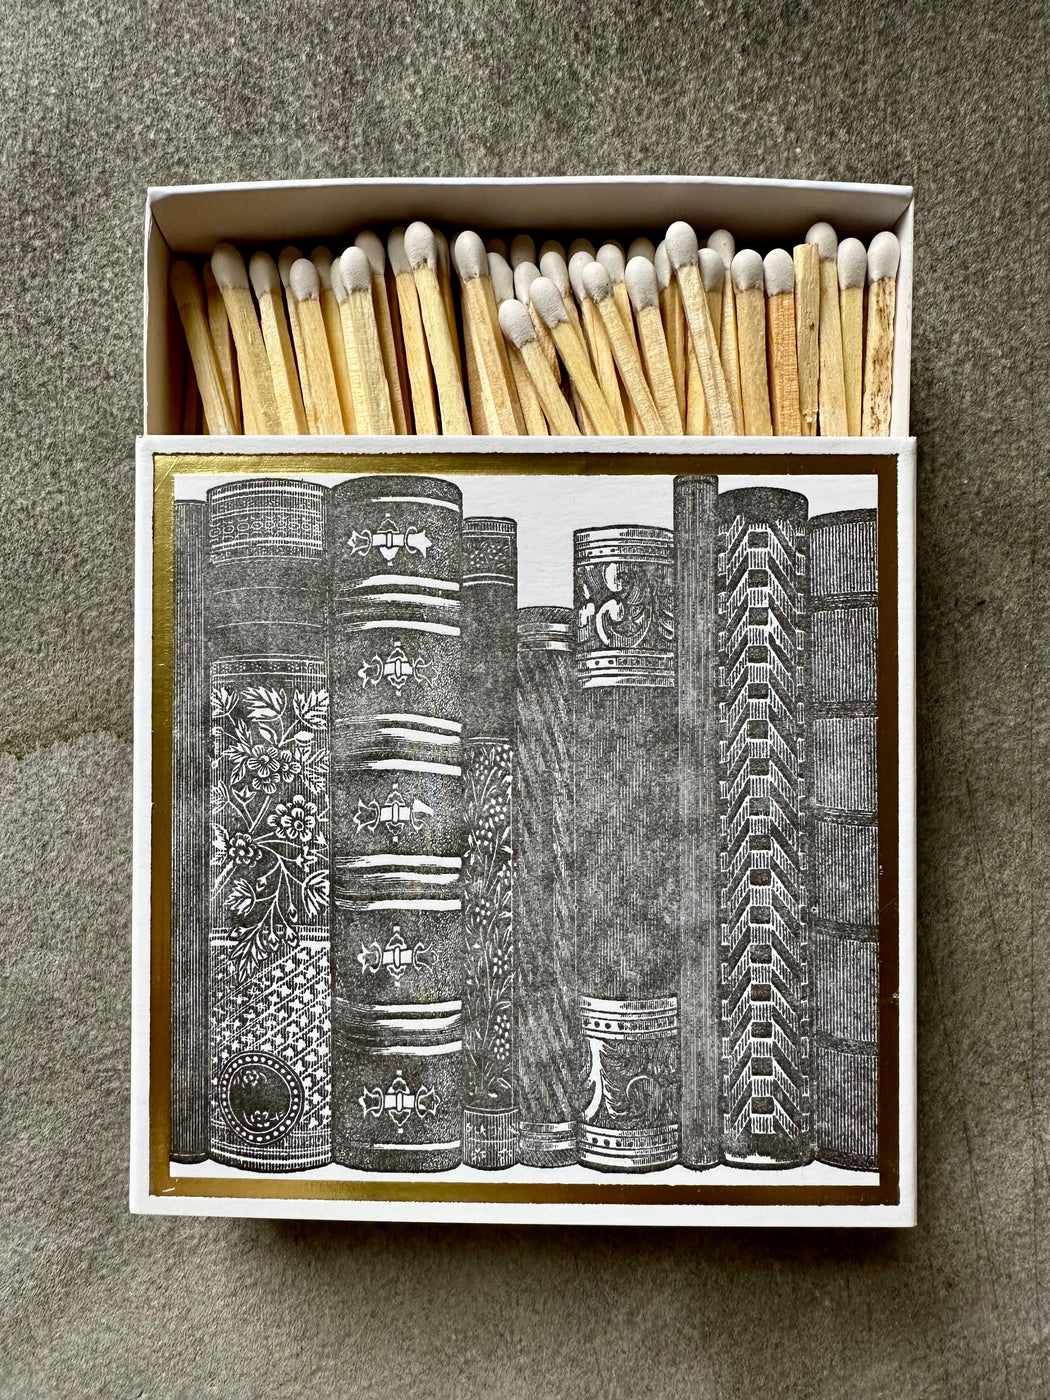 "Books" Matches by Archivist Gallery